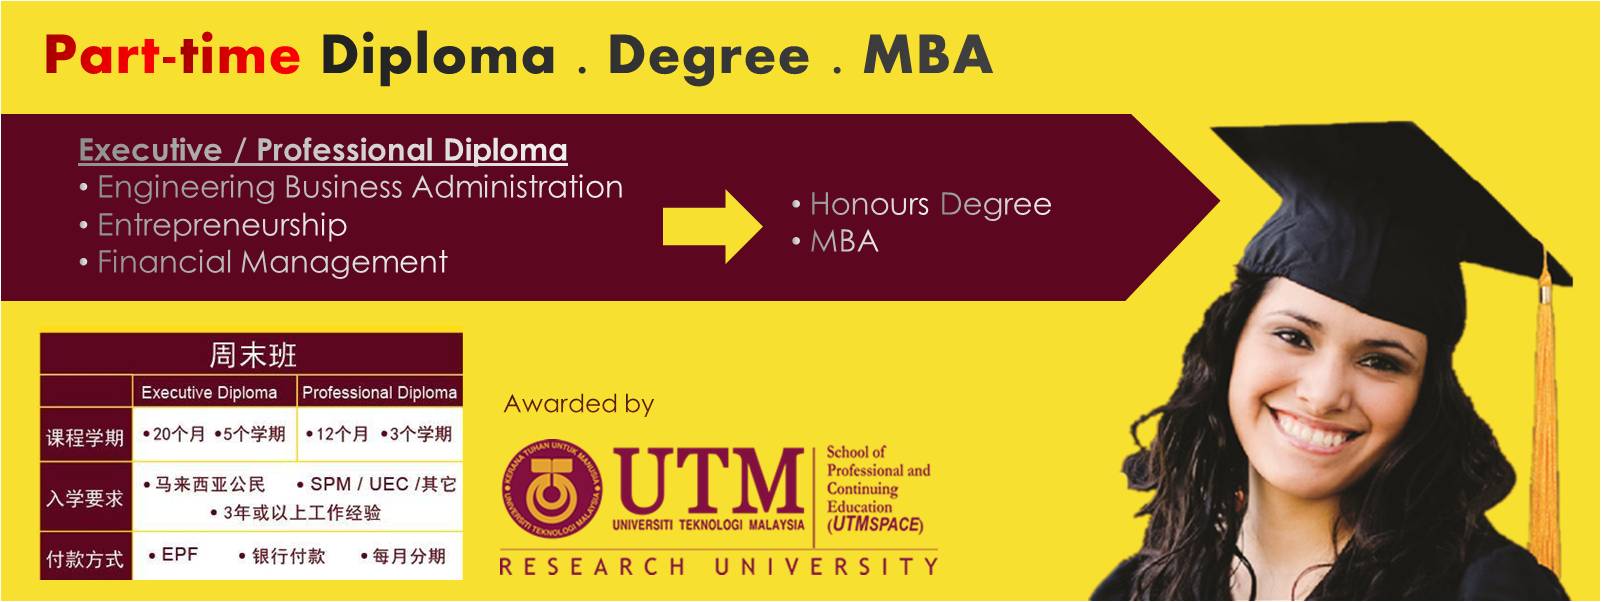 Banner 03 – Part time diploma, degree, MBA in Johor Bahru.